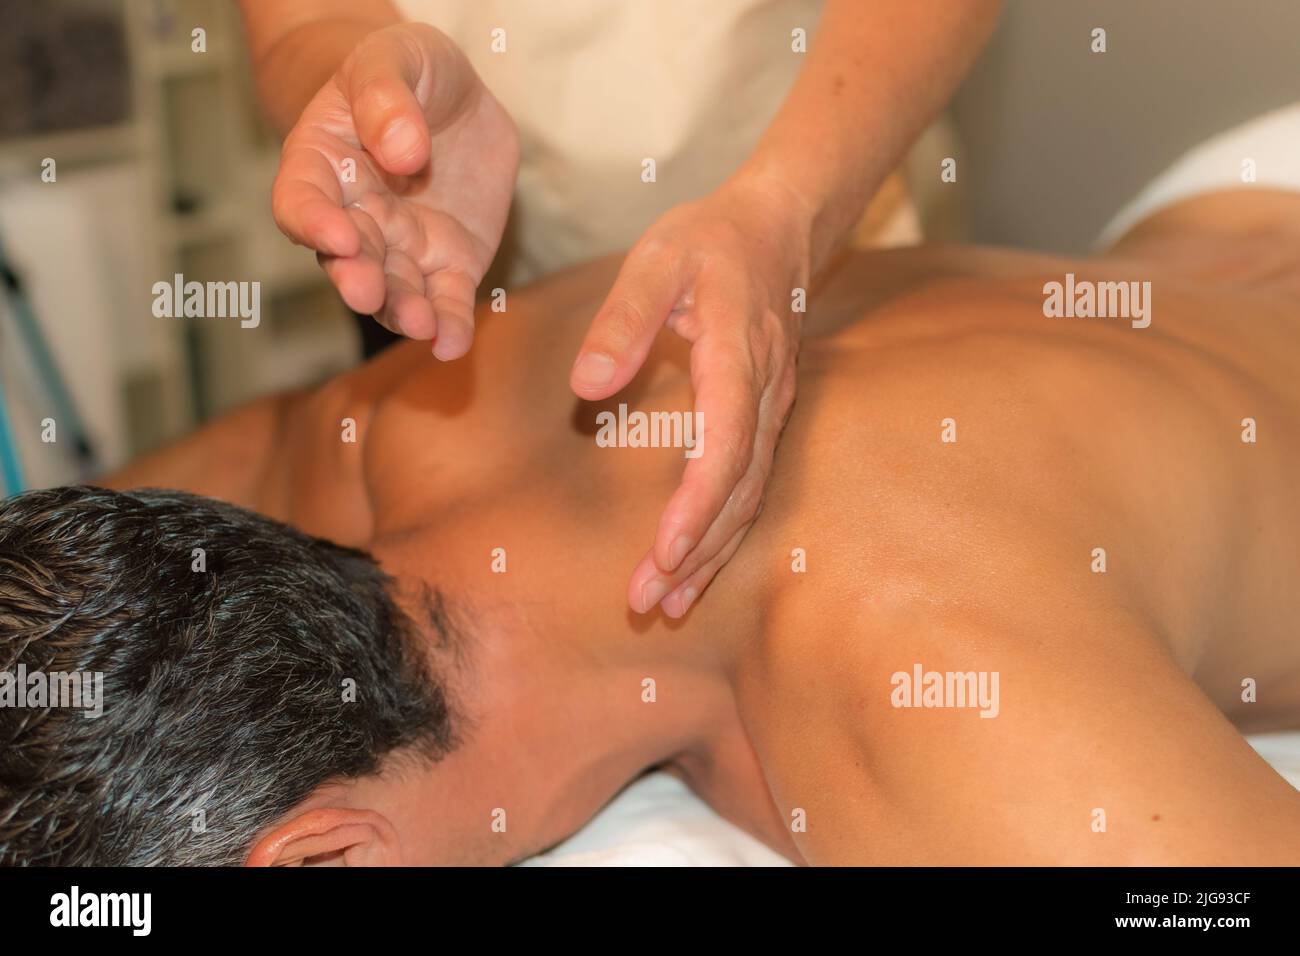 man receiving therapeutic massage by percussion on the upper back area Stock Photo